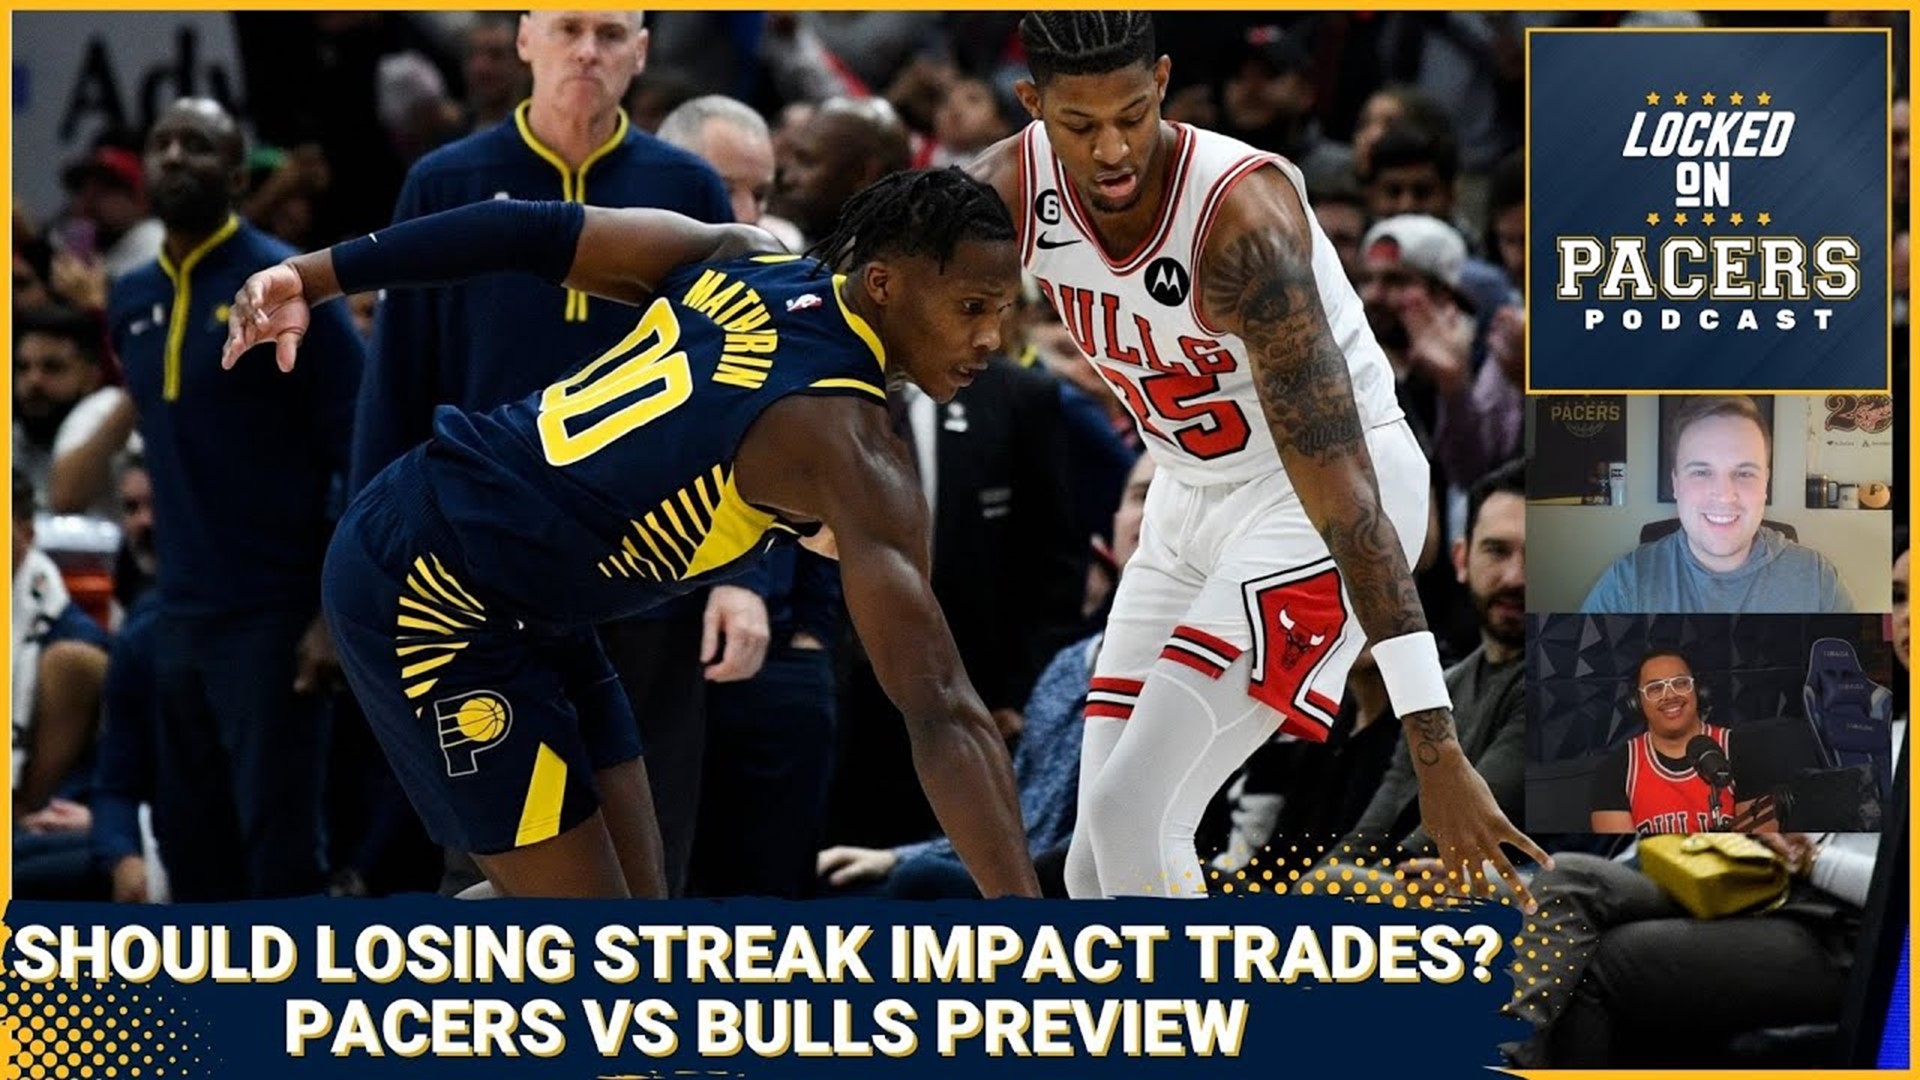 How the Indiana Pacers losing streak should change their trade deadline plans + Pacers-Bulls preview